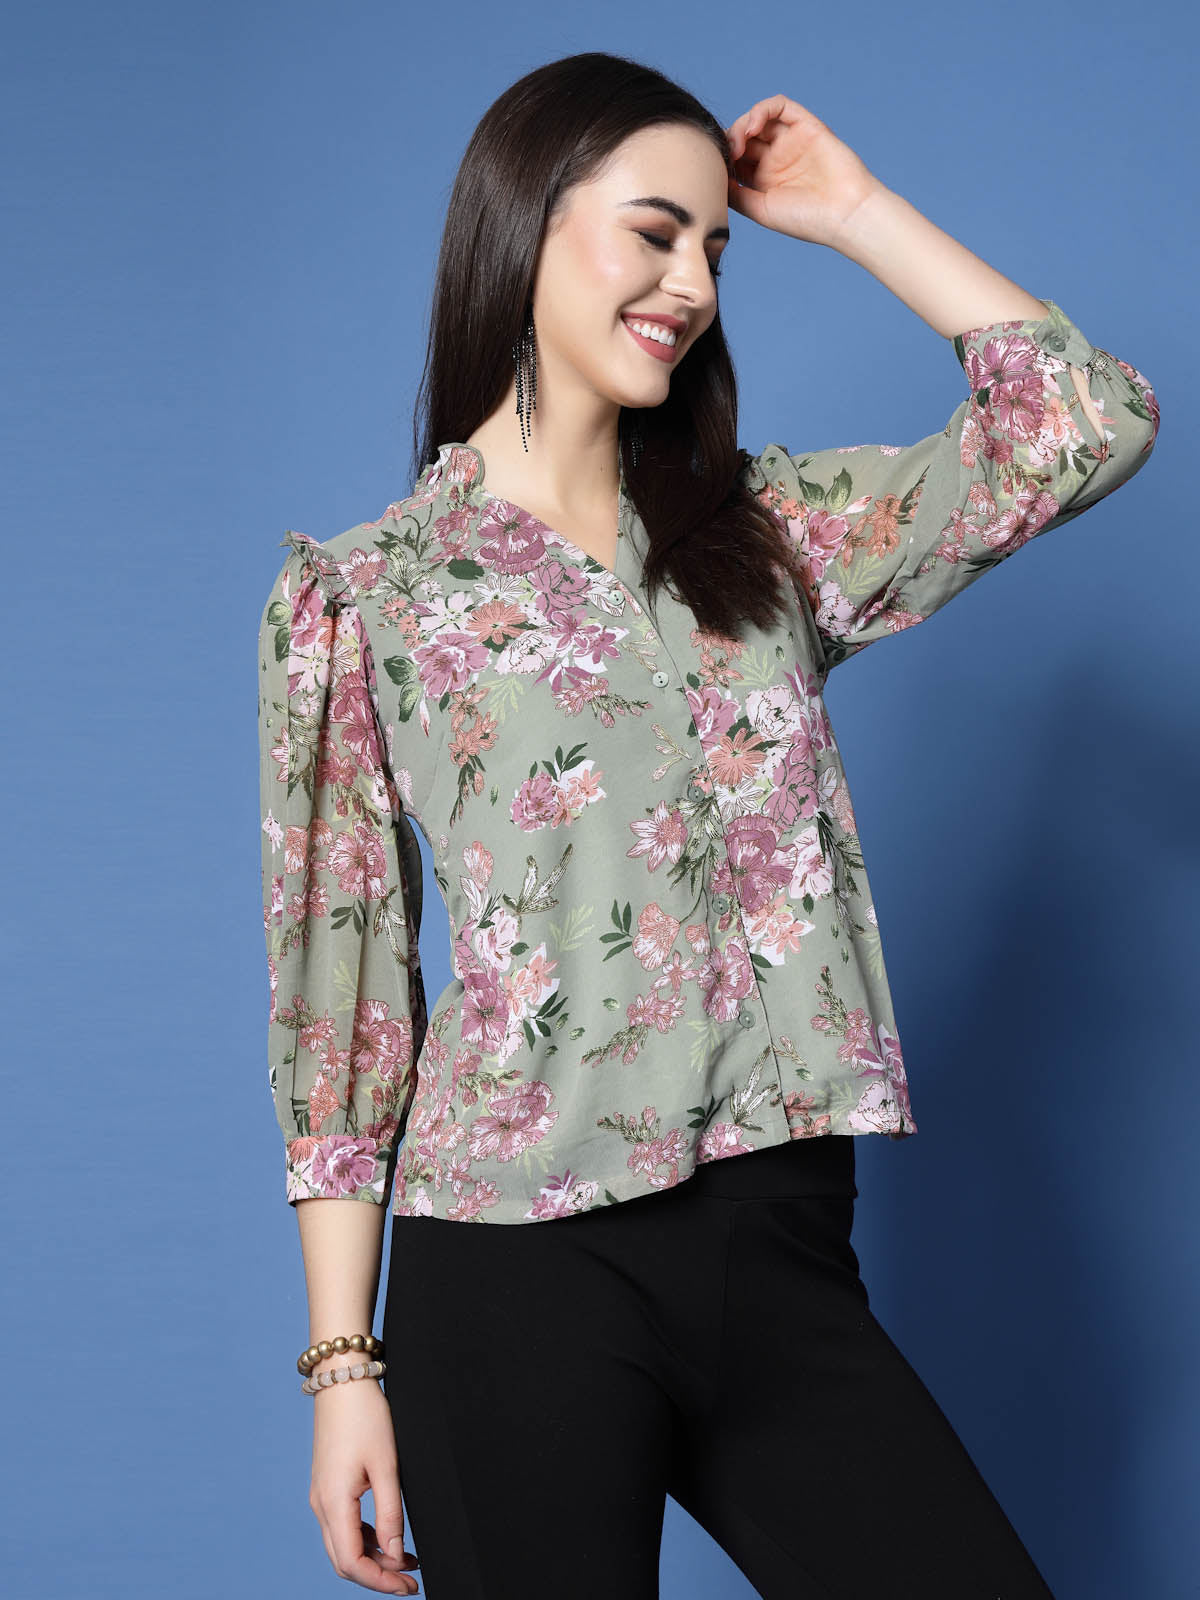 Sea Green Floral Printed V-Neck Cuffed Sleeve Ruffled Shirt Style Top